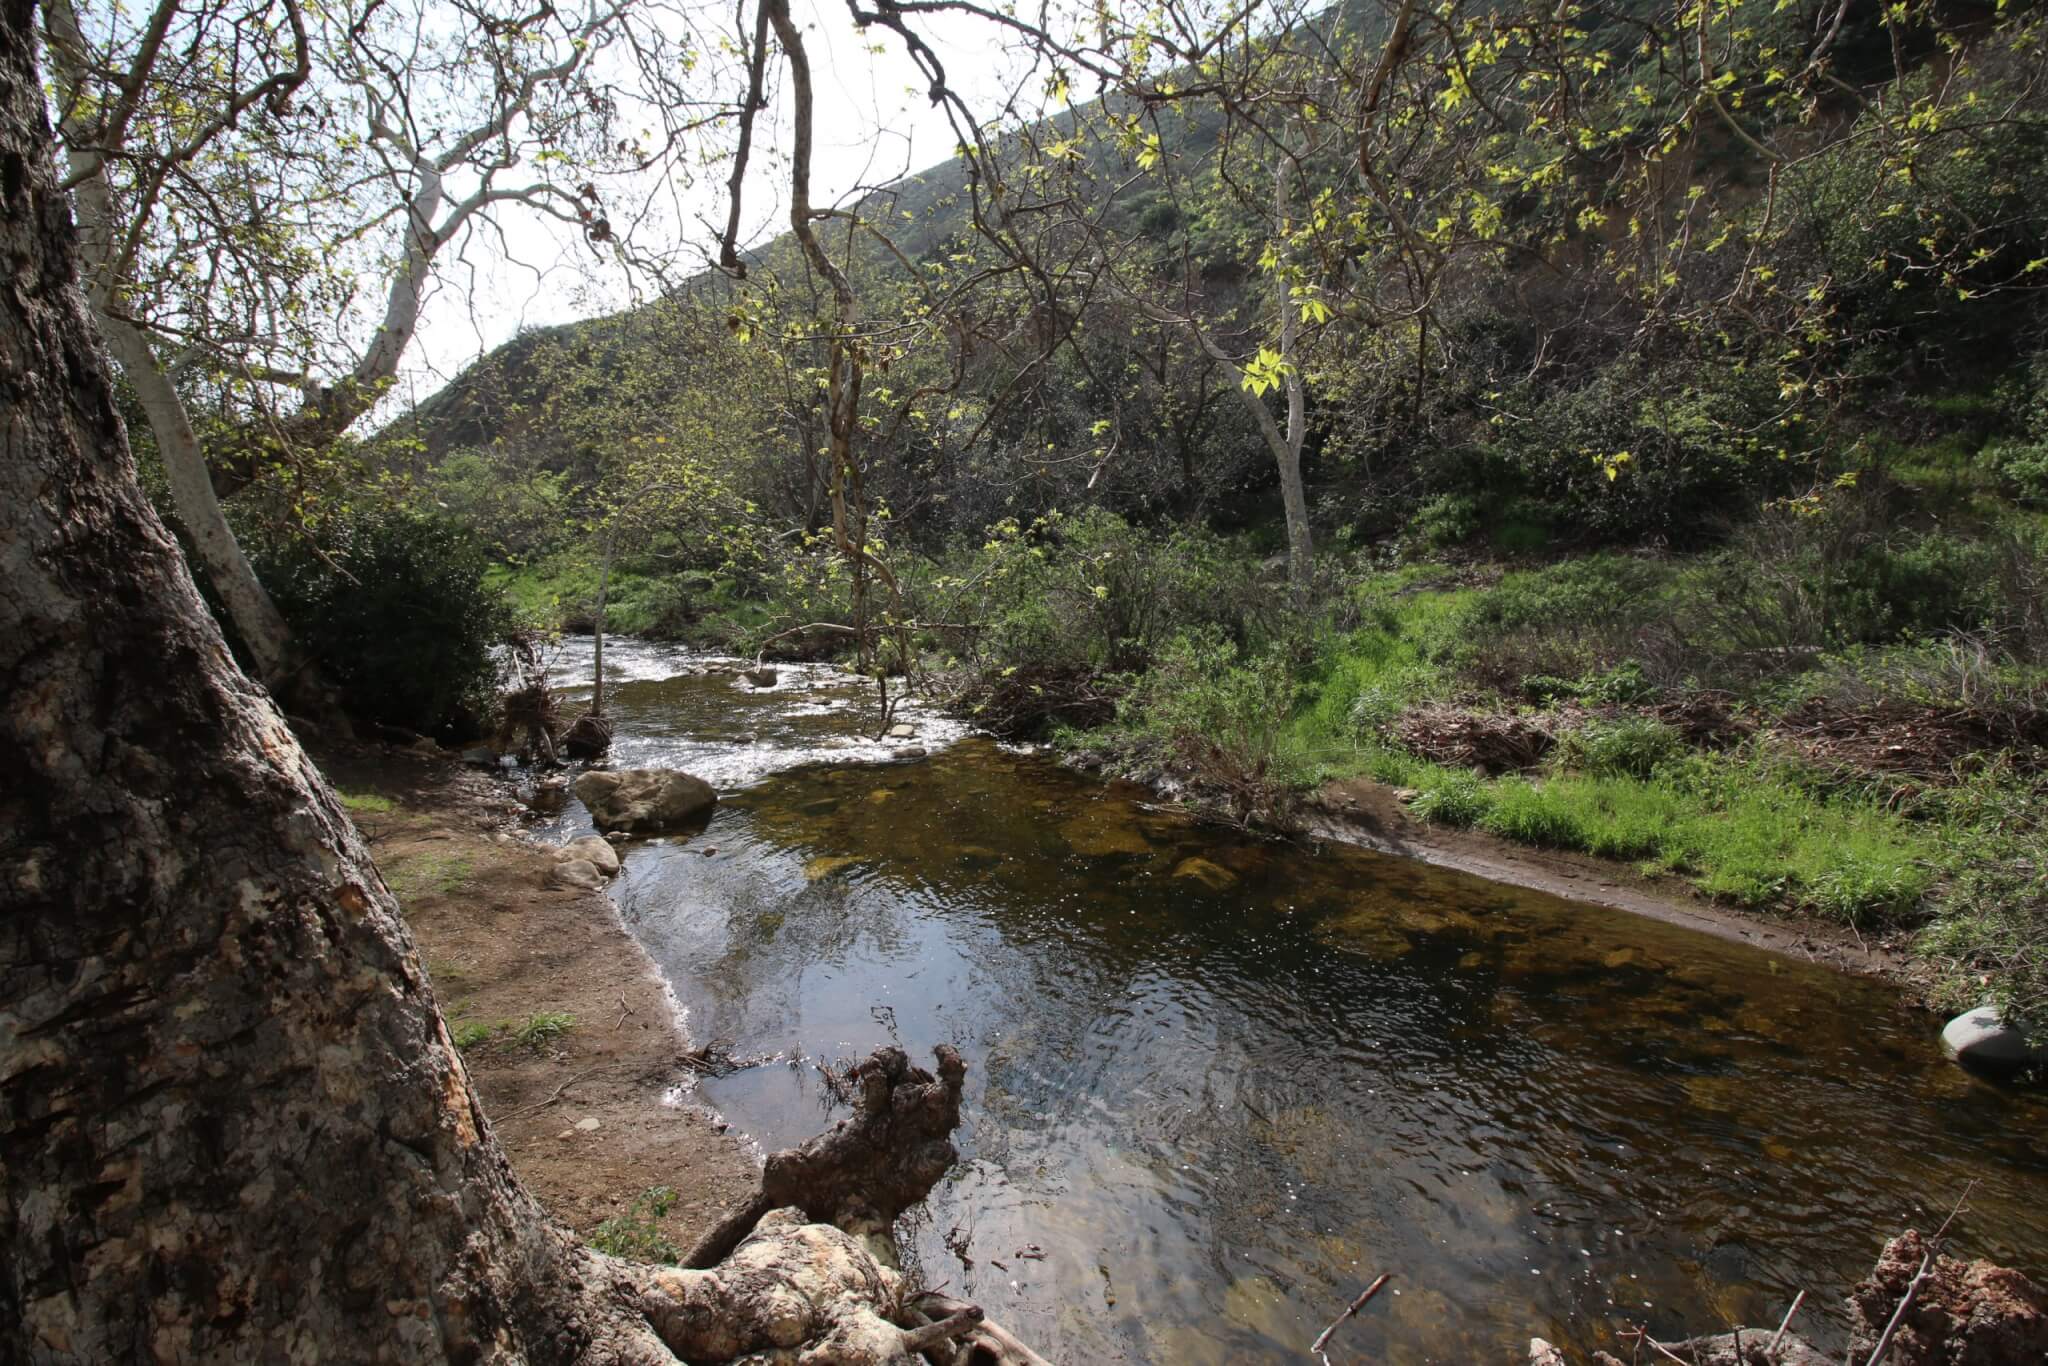 Southern California's Best Campgrounds - Leo Carrillo Creek View